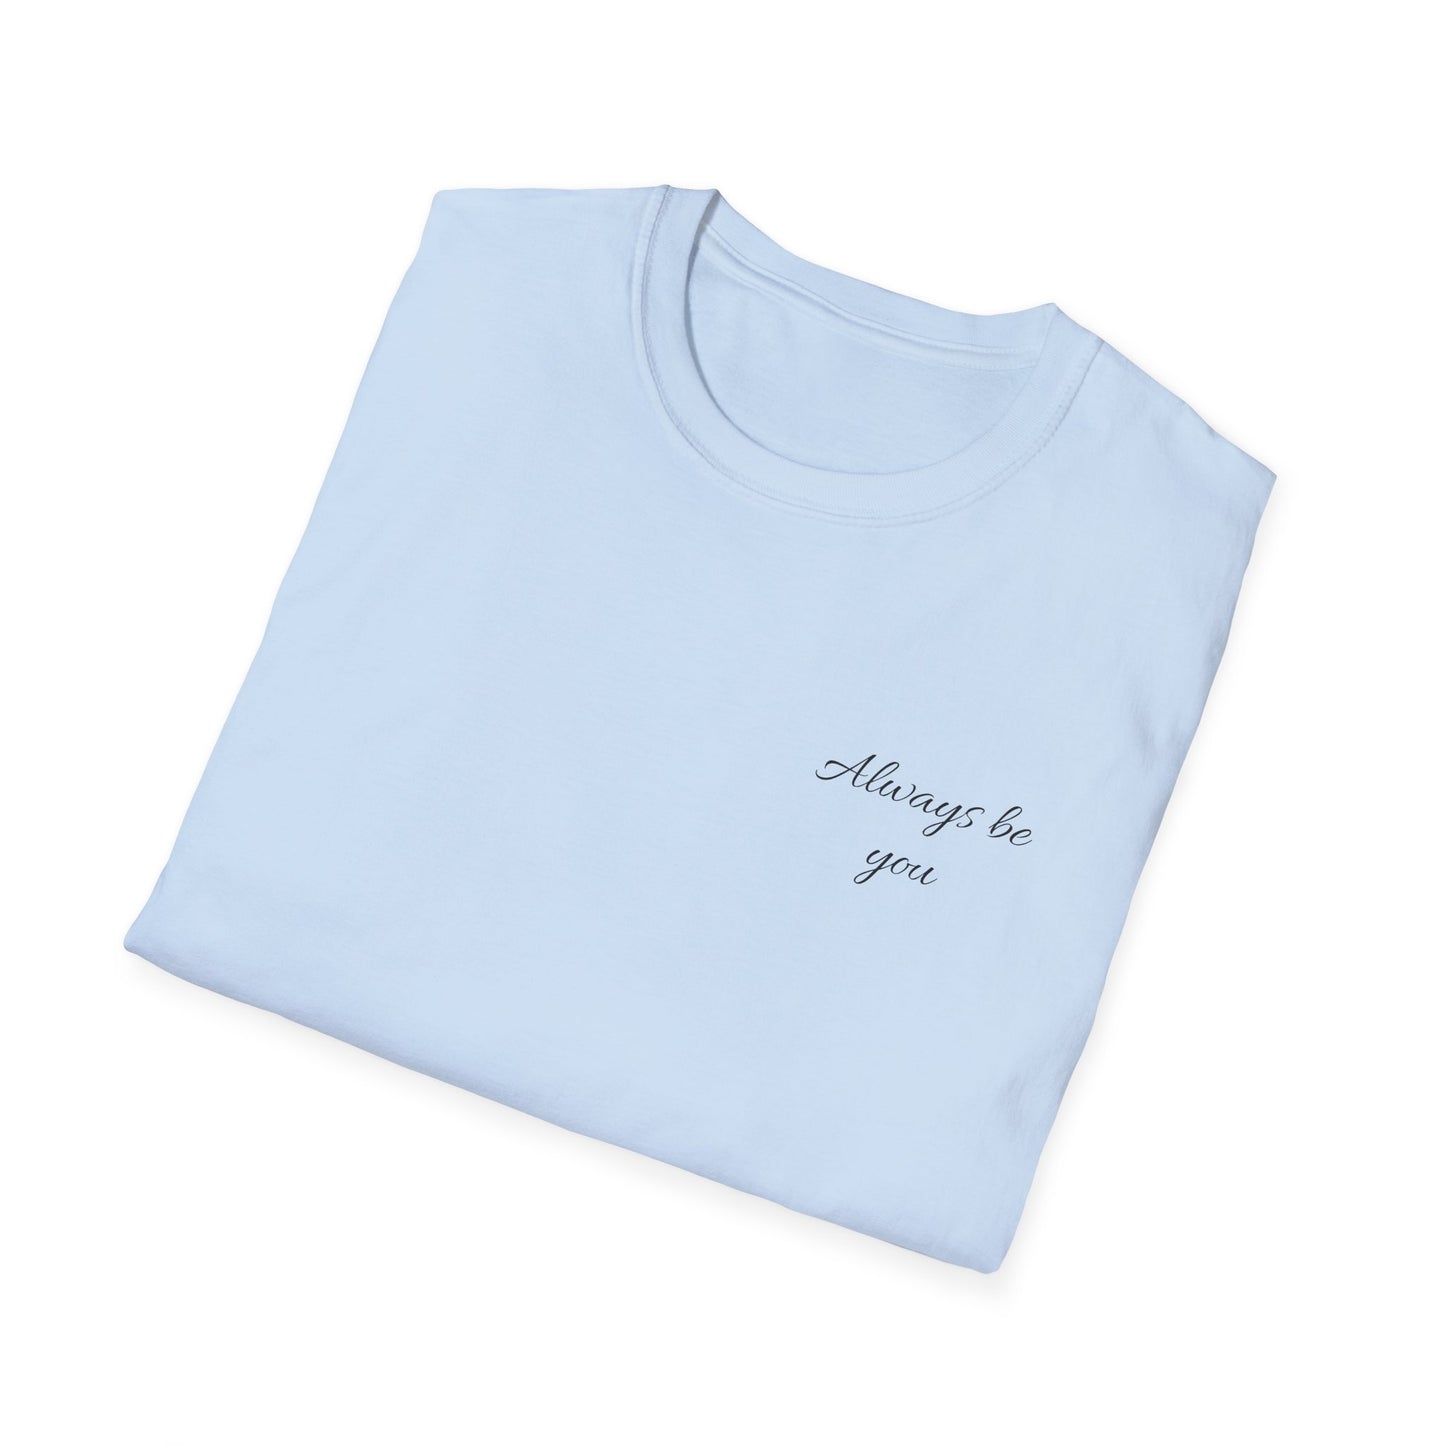 Always be you, T-Shirt